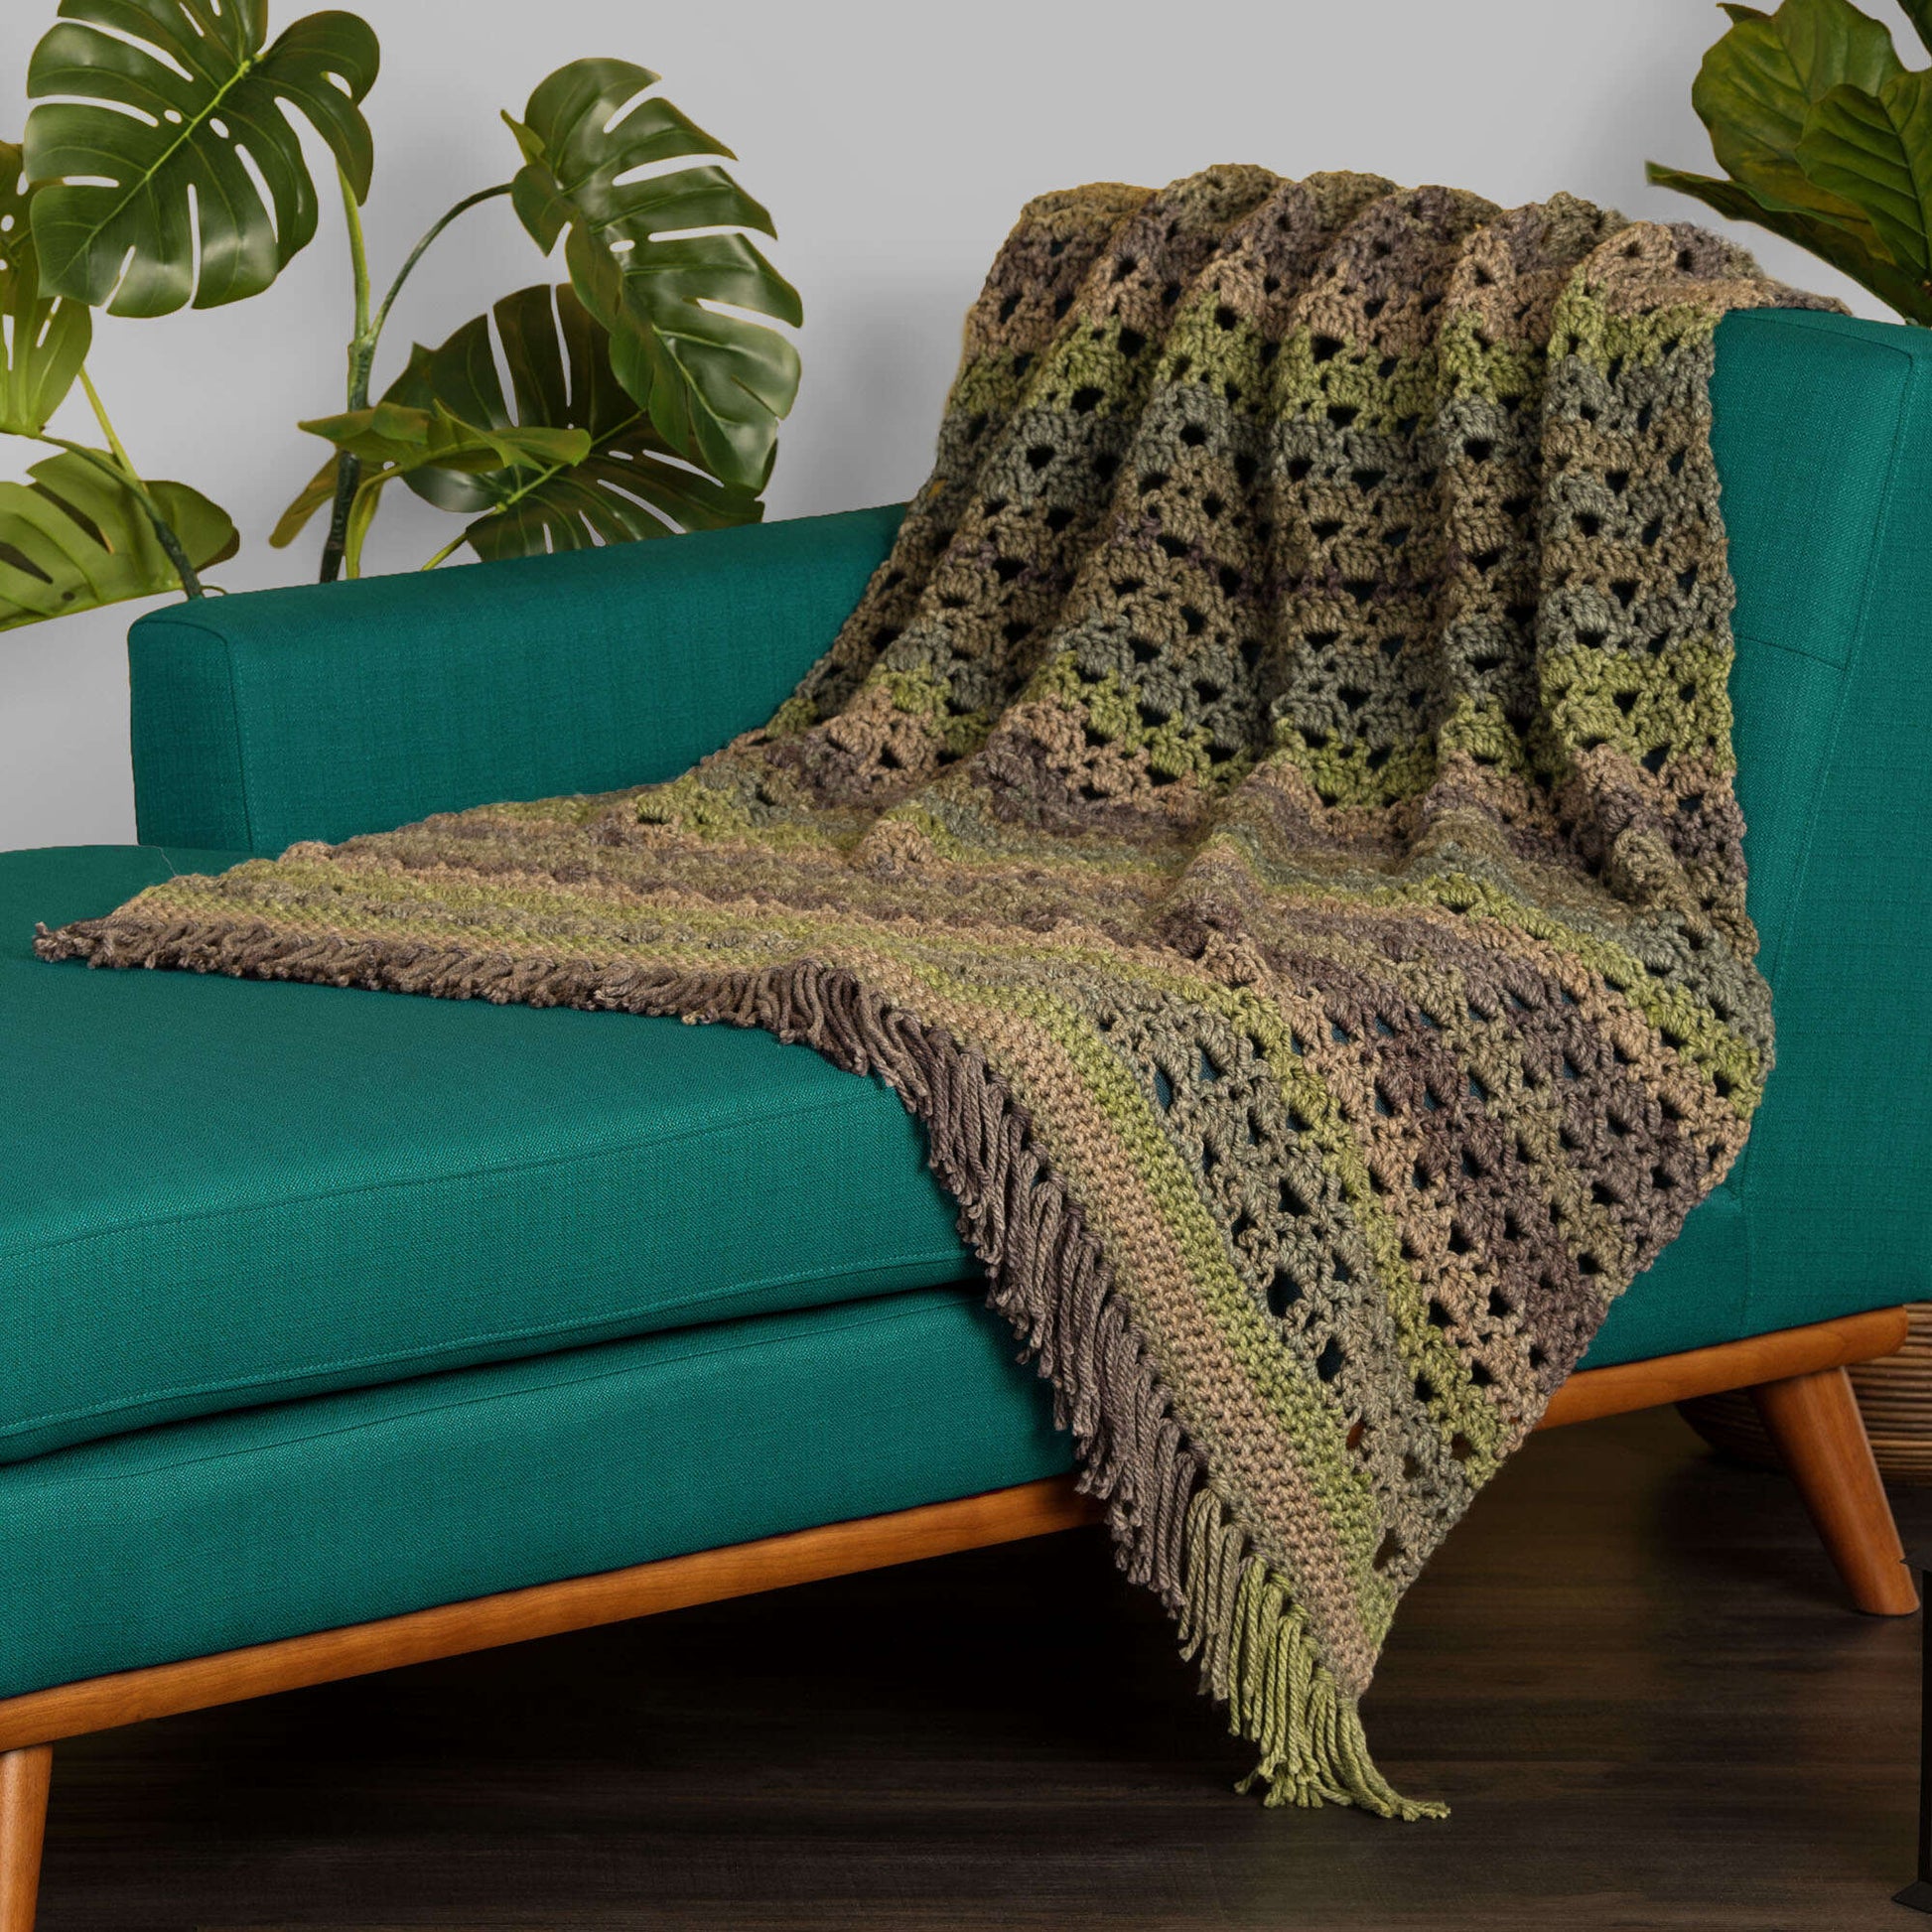 Caron Stacking Triangles Lacy Crochet Blanket Crochet Blanket made in Caron Tea Cakes yarn